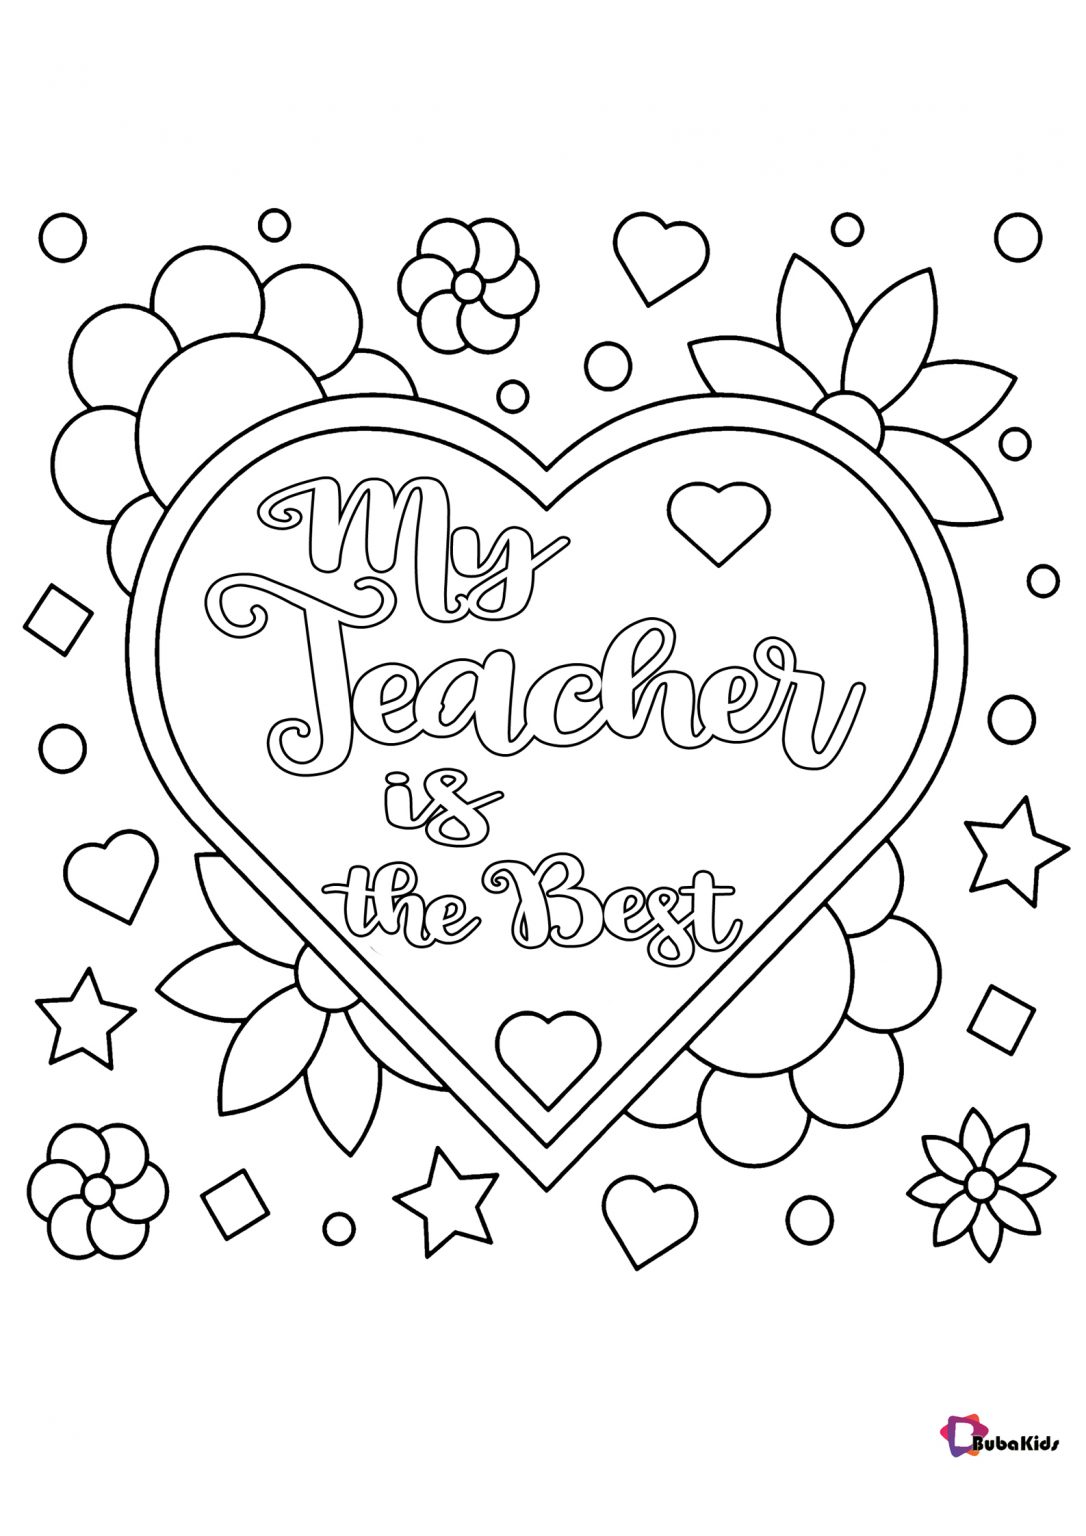 Free download to print Teacher appreciation day coloring pages